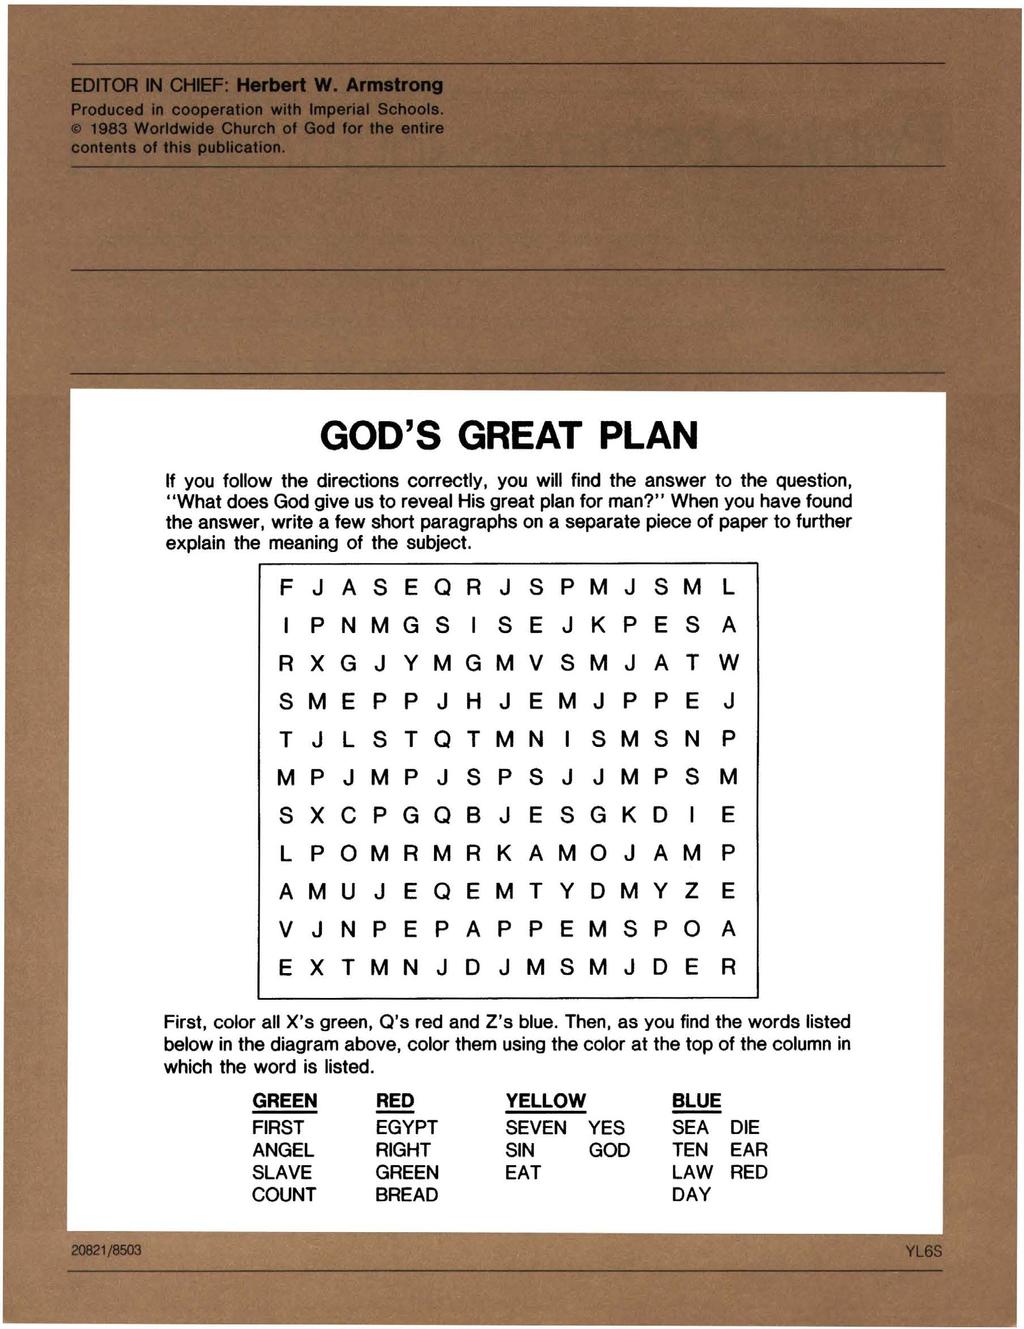 GOD'S GREAT PLAN If you follow the directions correctly, you will find the answer to the question, "What does God give us to reveal His great plan for man?